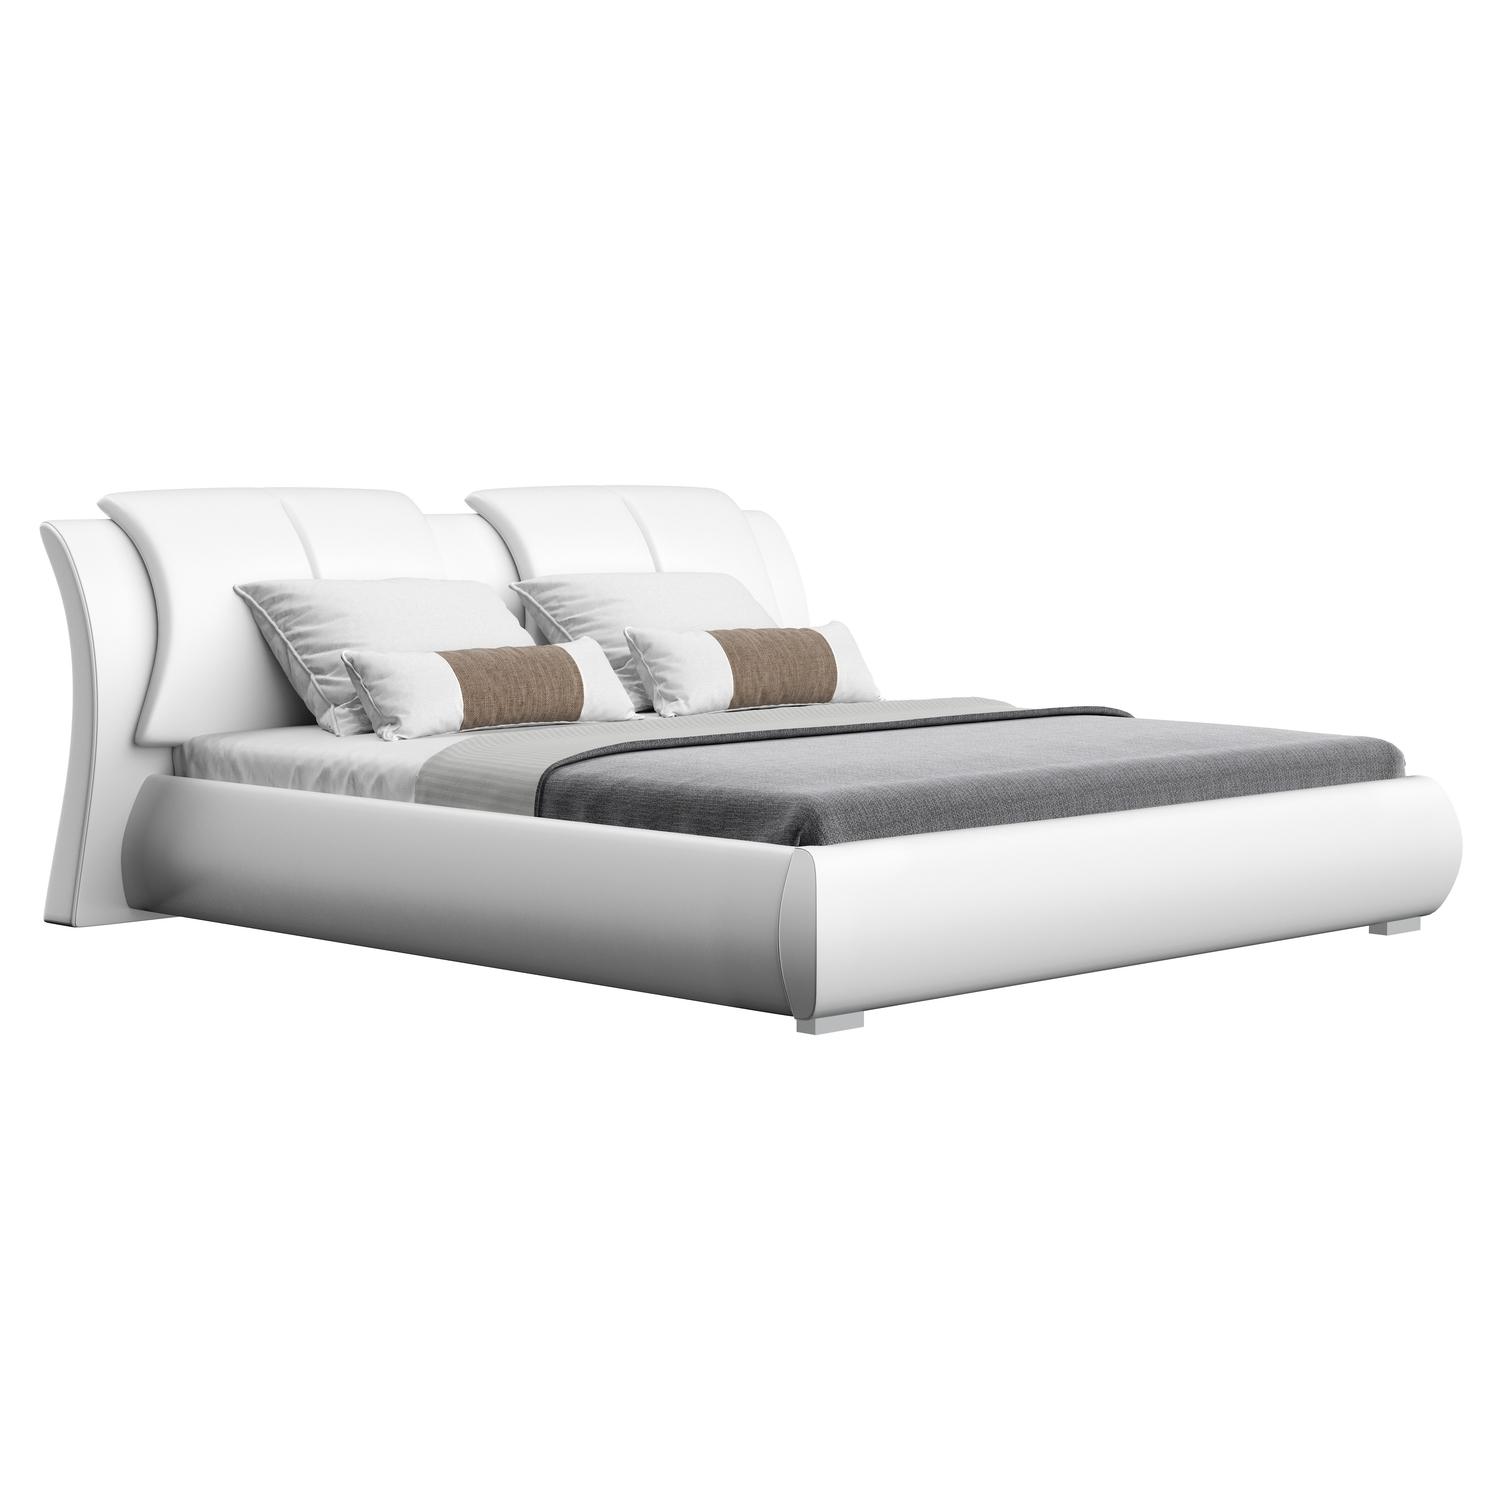 Contemporary, Modern Platform Bed 8269 8269-WH-QB in White Faux Leather